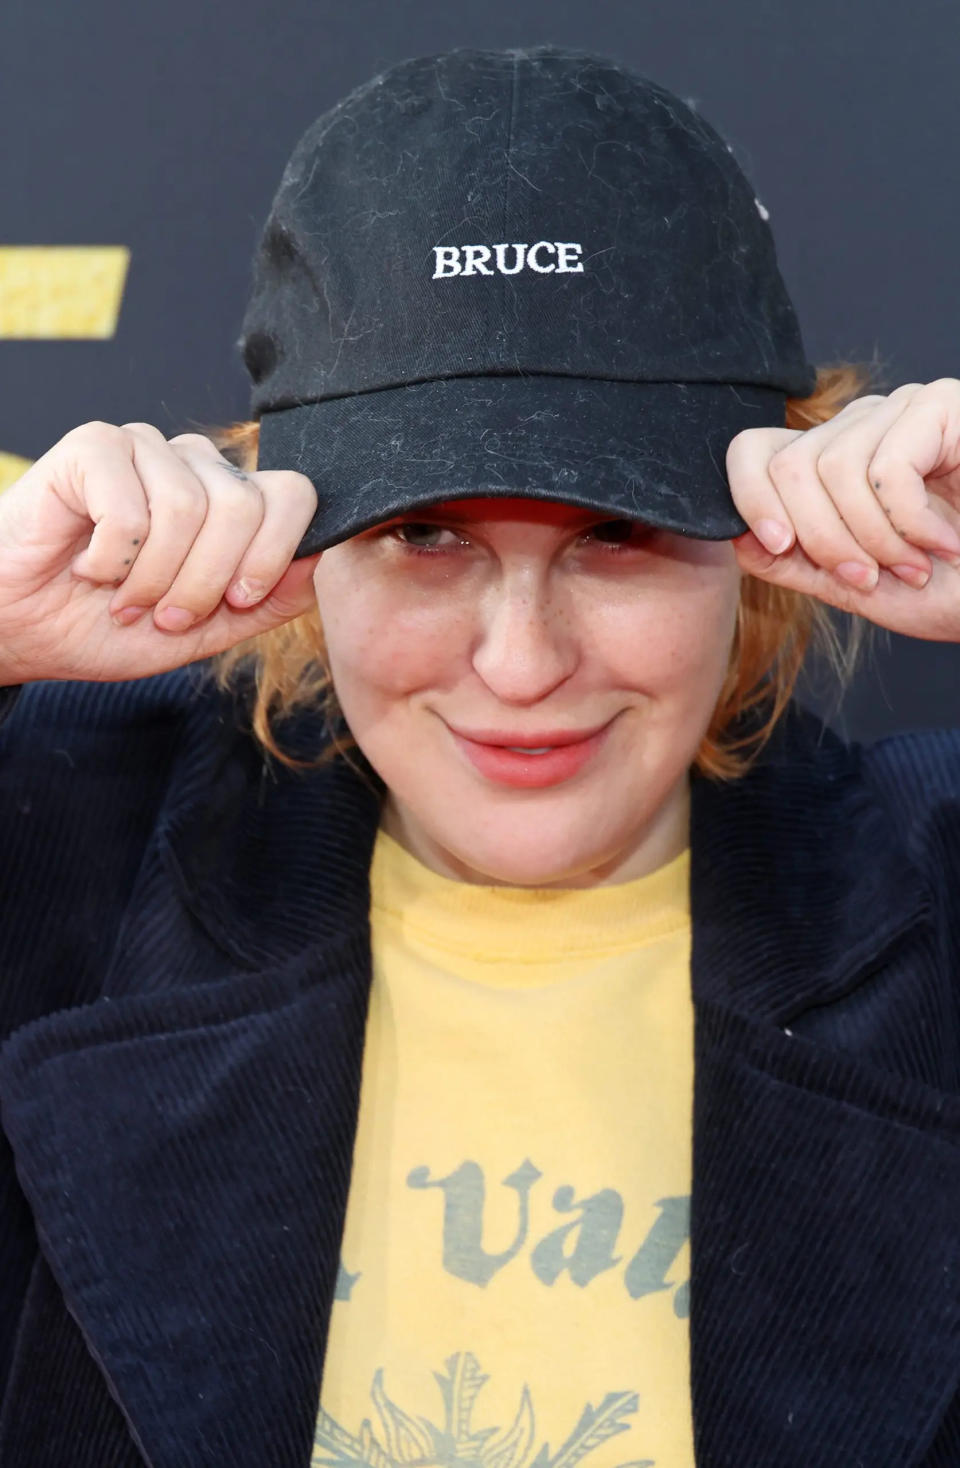 Tallulah Willis wearing a black hat with the name "Bruce" embroidered.